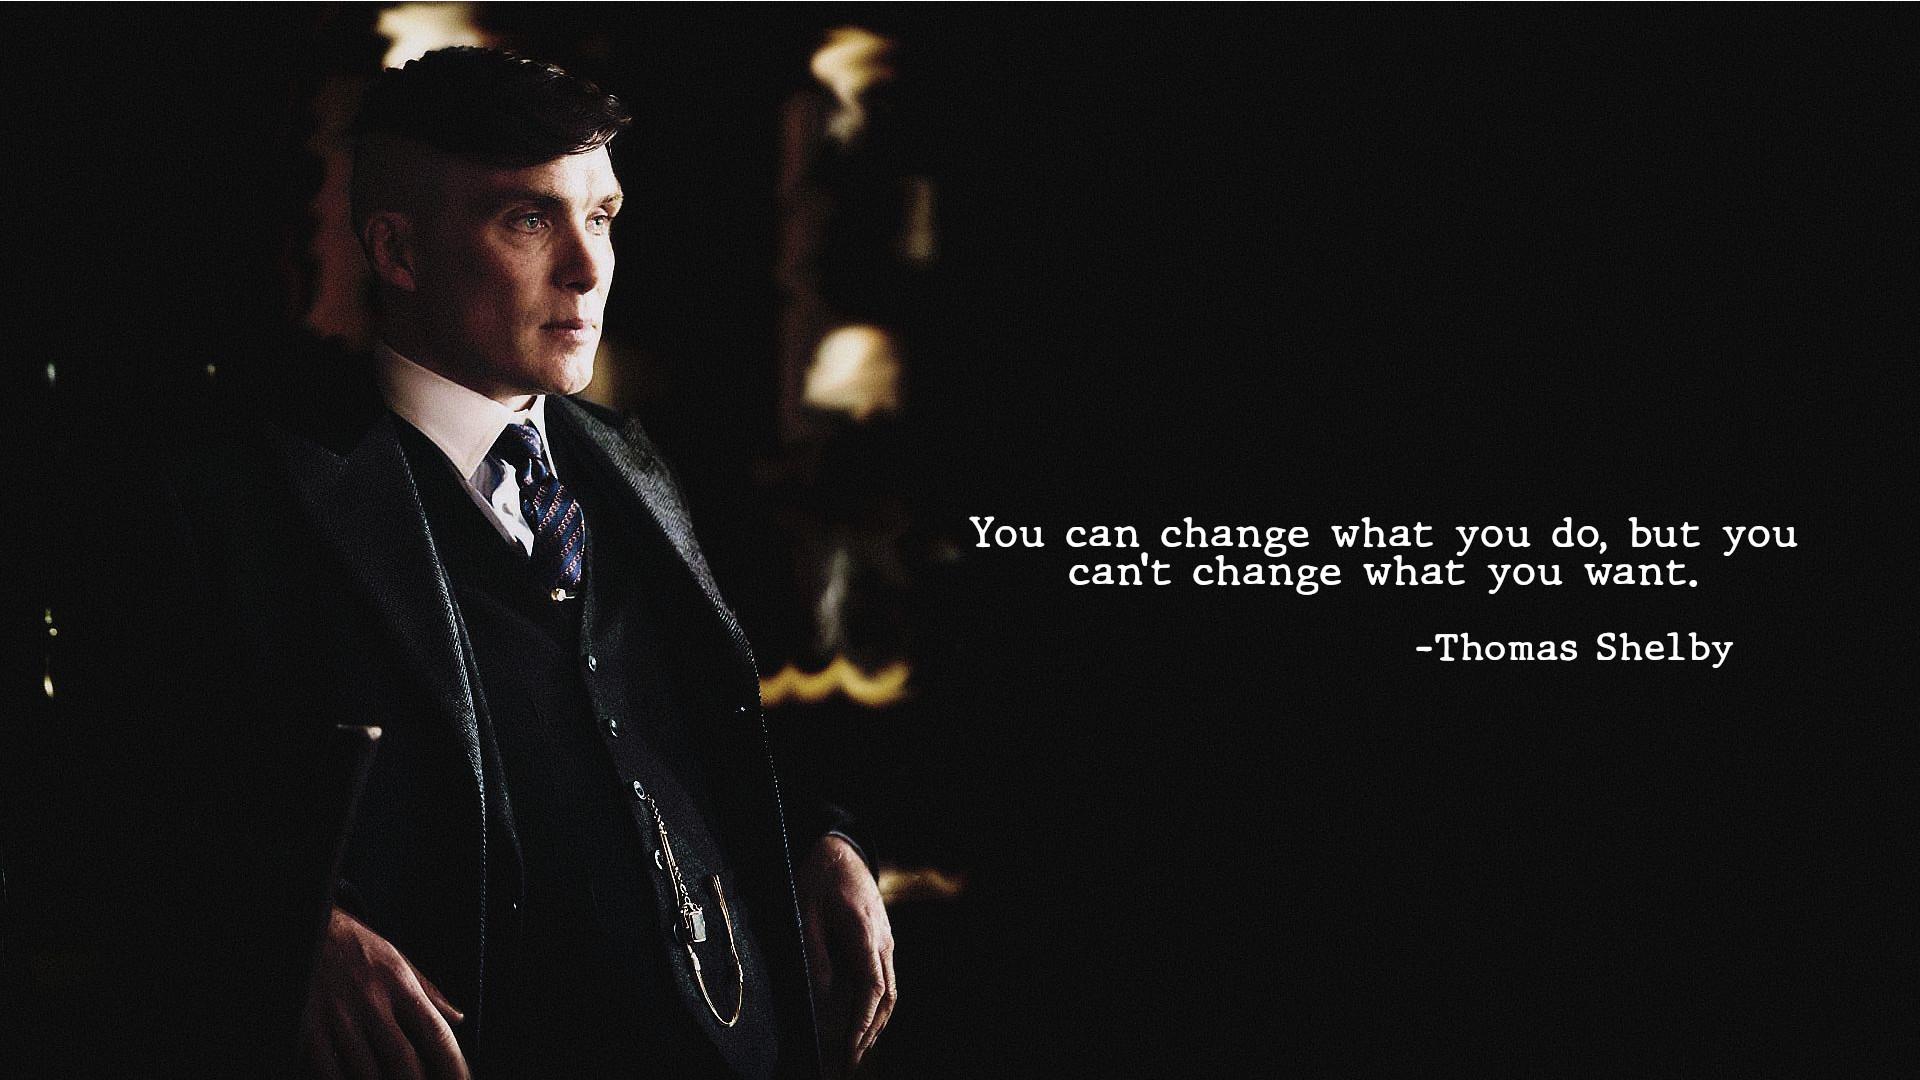 Thomas Shelby wallpaper  Peaky blinders quotes Savage quotes Peaky  blinders characters